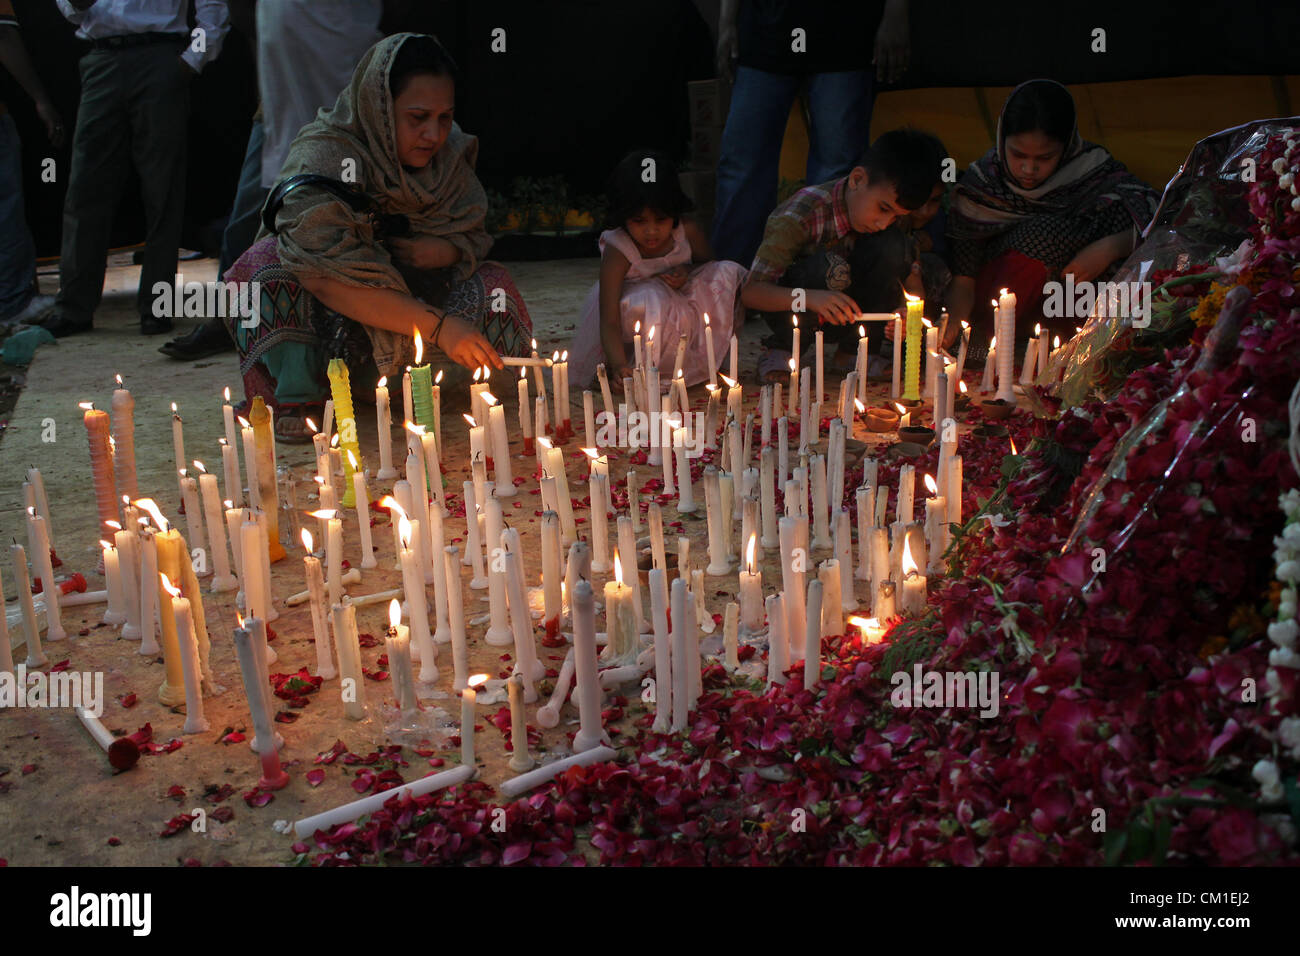 Relatives of the burnt factory workers light candles at the site of the incident in Karachi, Pakistan on September 13, 2012. Atleast 289 factory workers were burnt when fire engulfed a garment factory on Wednesday. Stock Photo